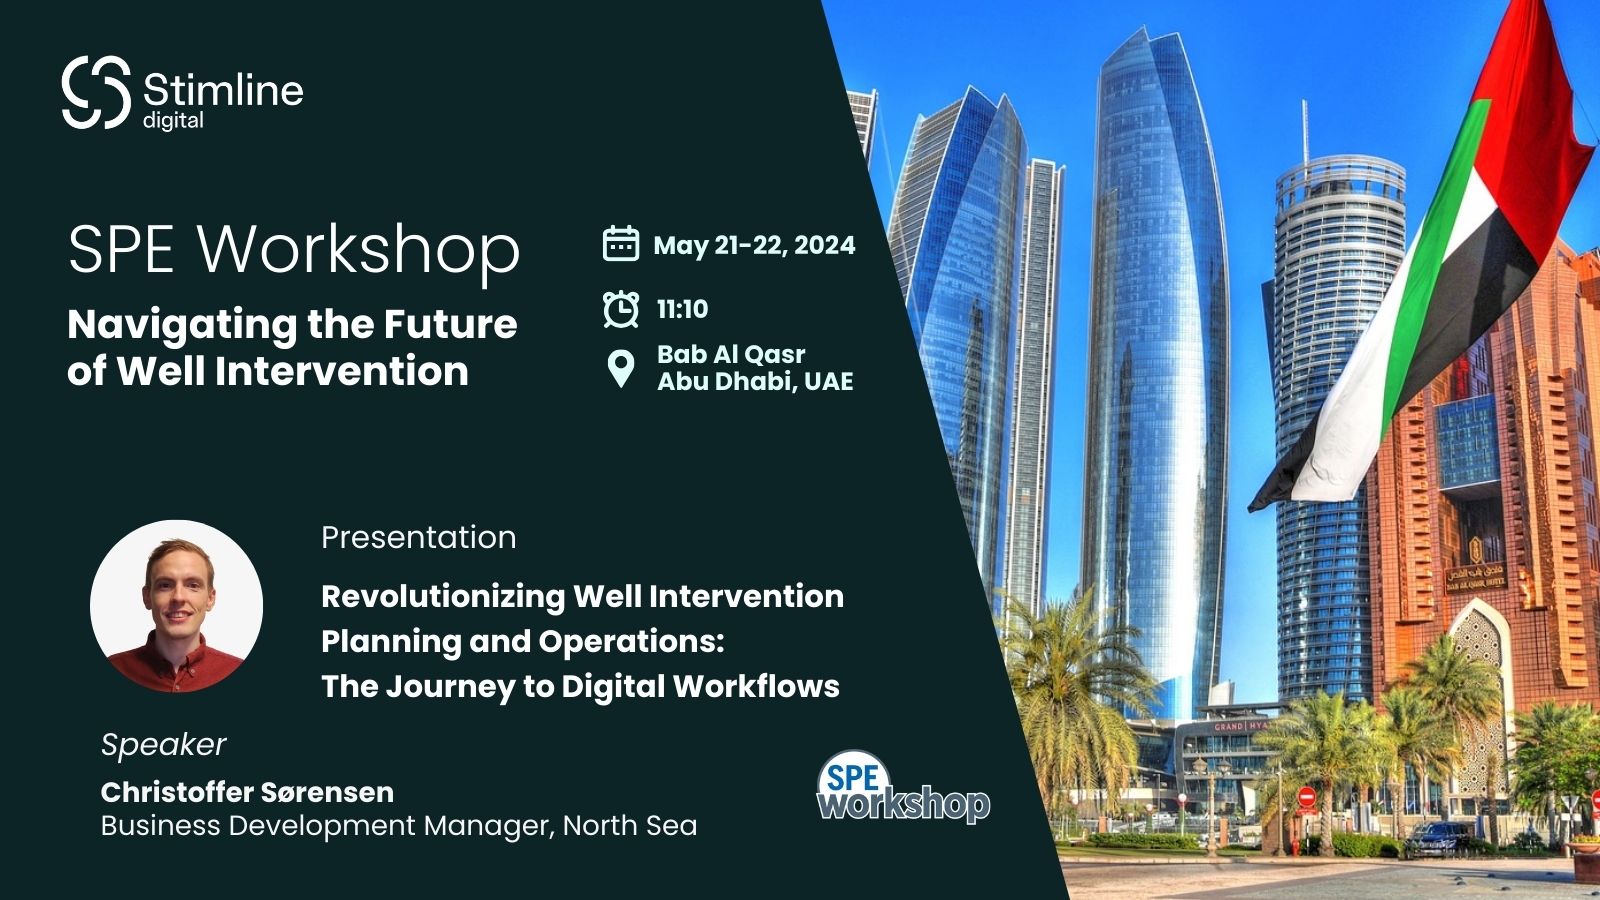 The Journey to Digital Workflows – Stimline Digital at Navigating the Future of Well Intervention Workshop